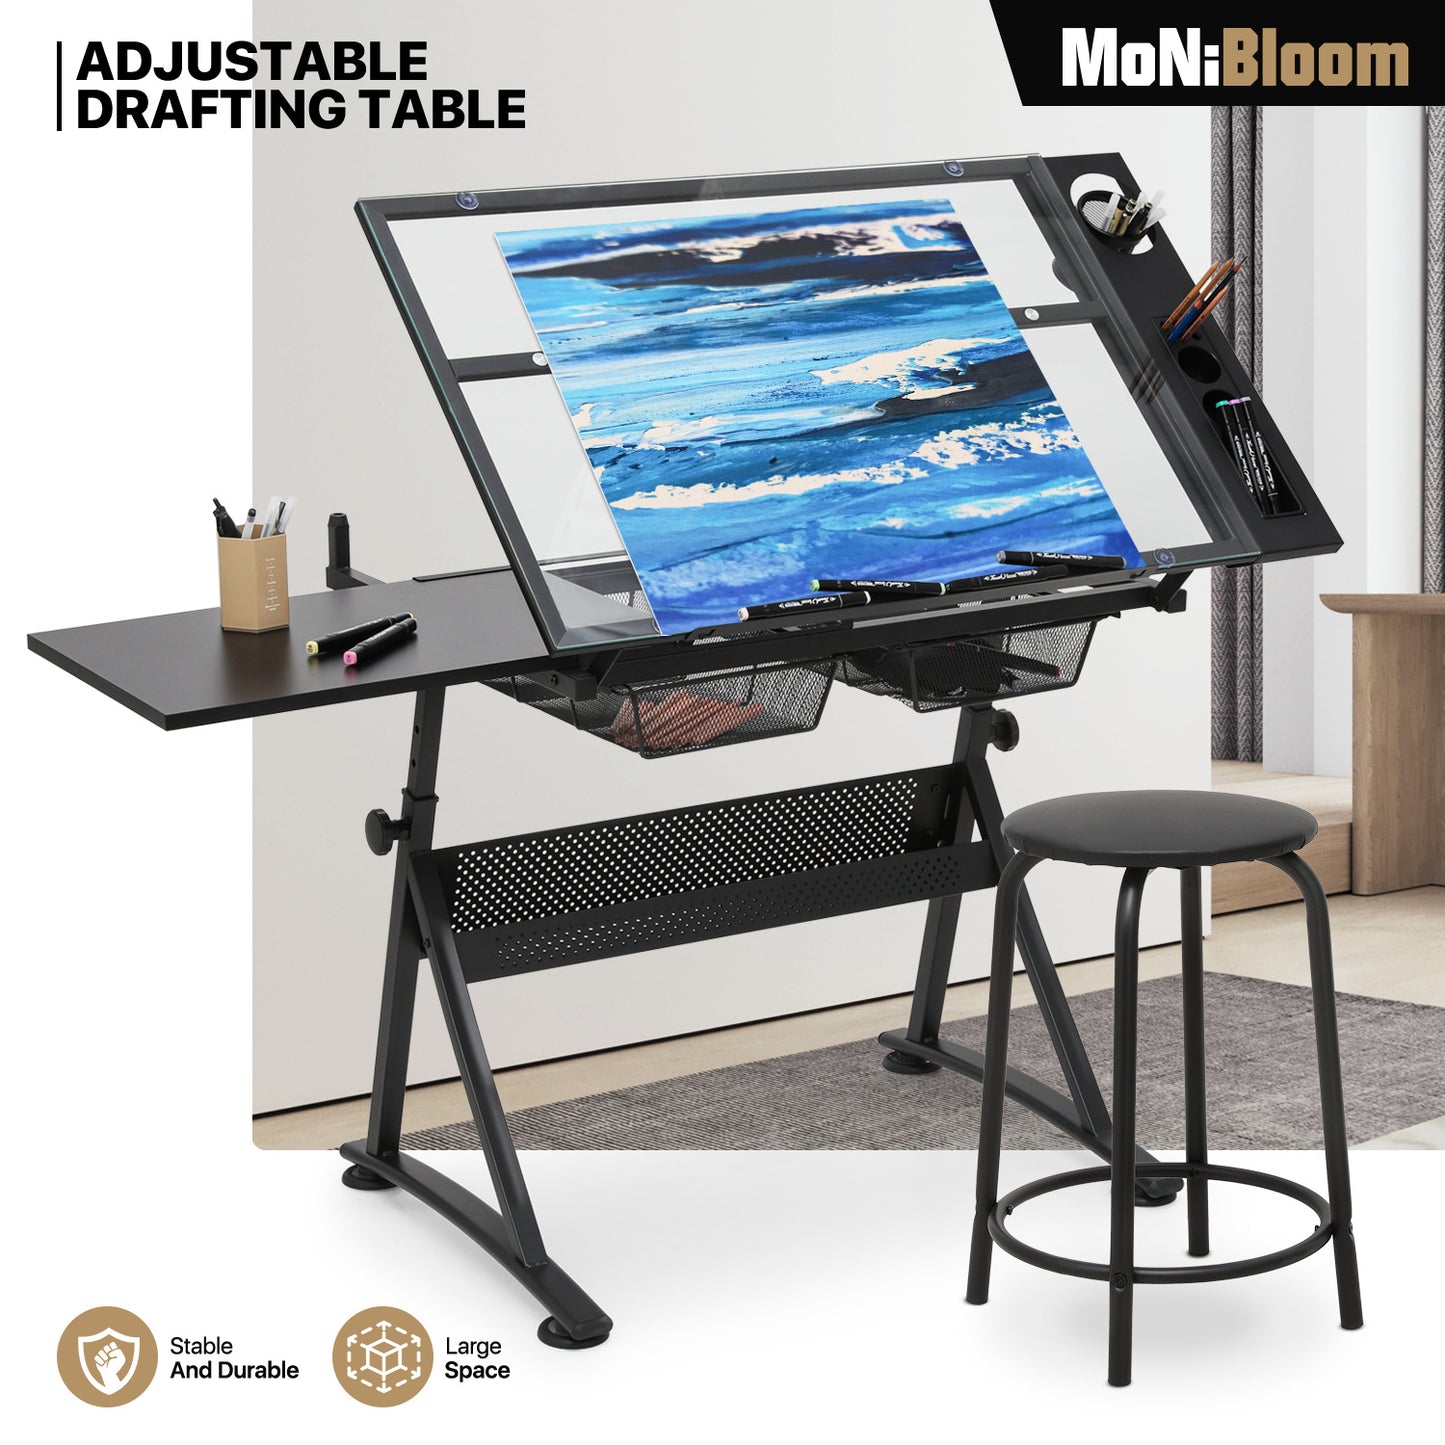 Drafting Table - 53" Crystal desktop with frame, 2 mesh drawers, with black stool